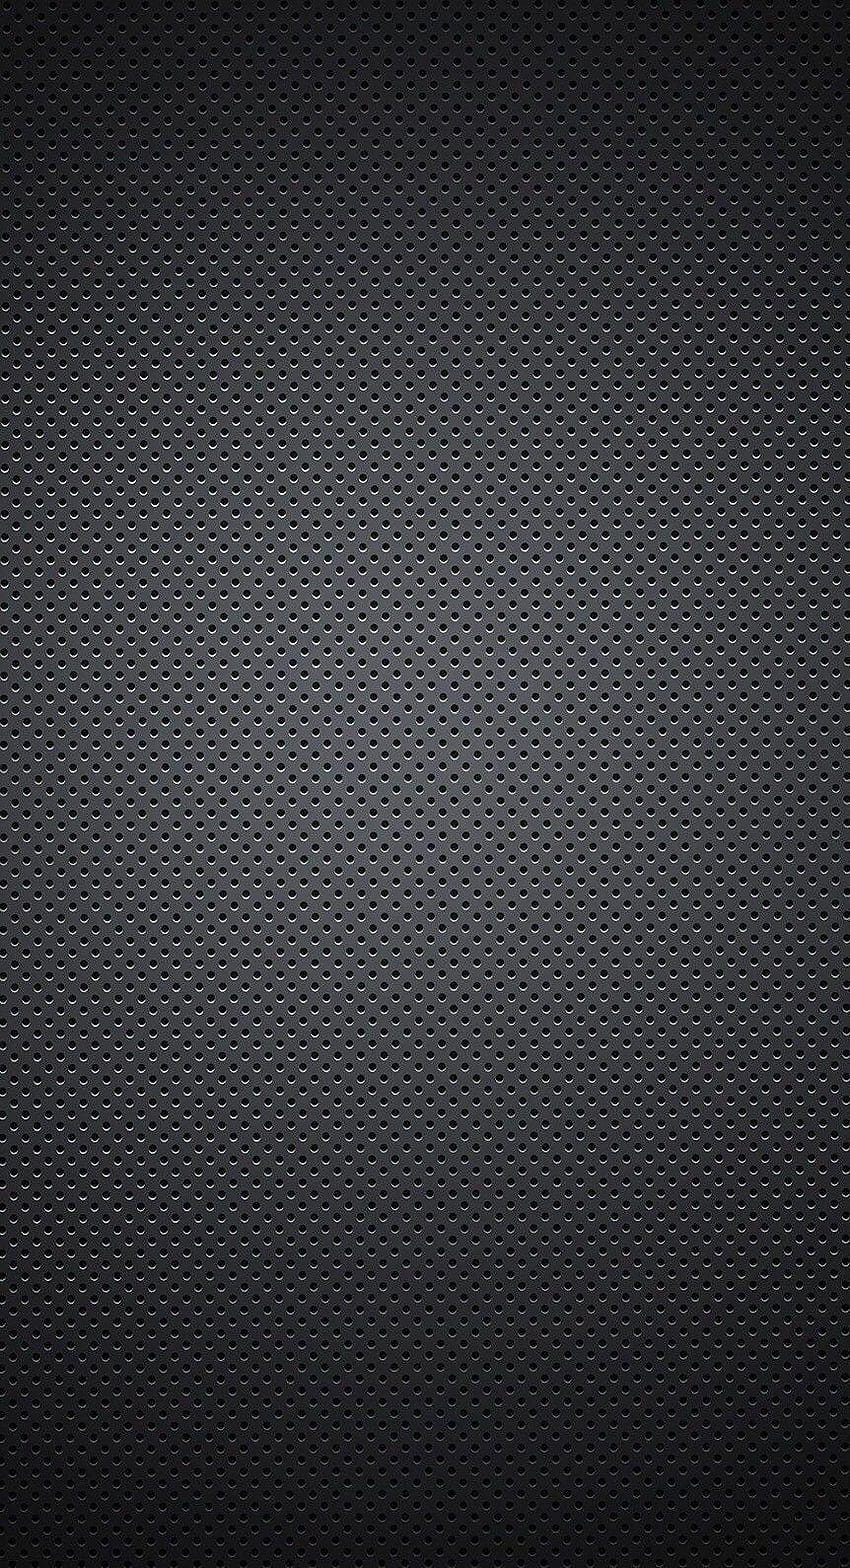 Here's 100 awesome iPhone 6, carbon HD phone wallpaper